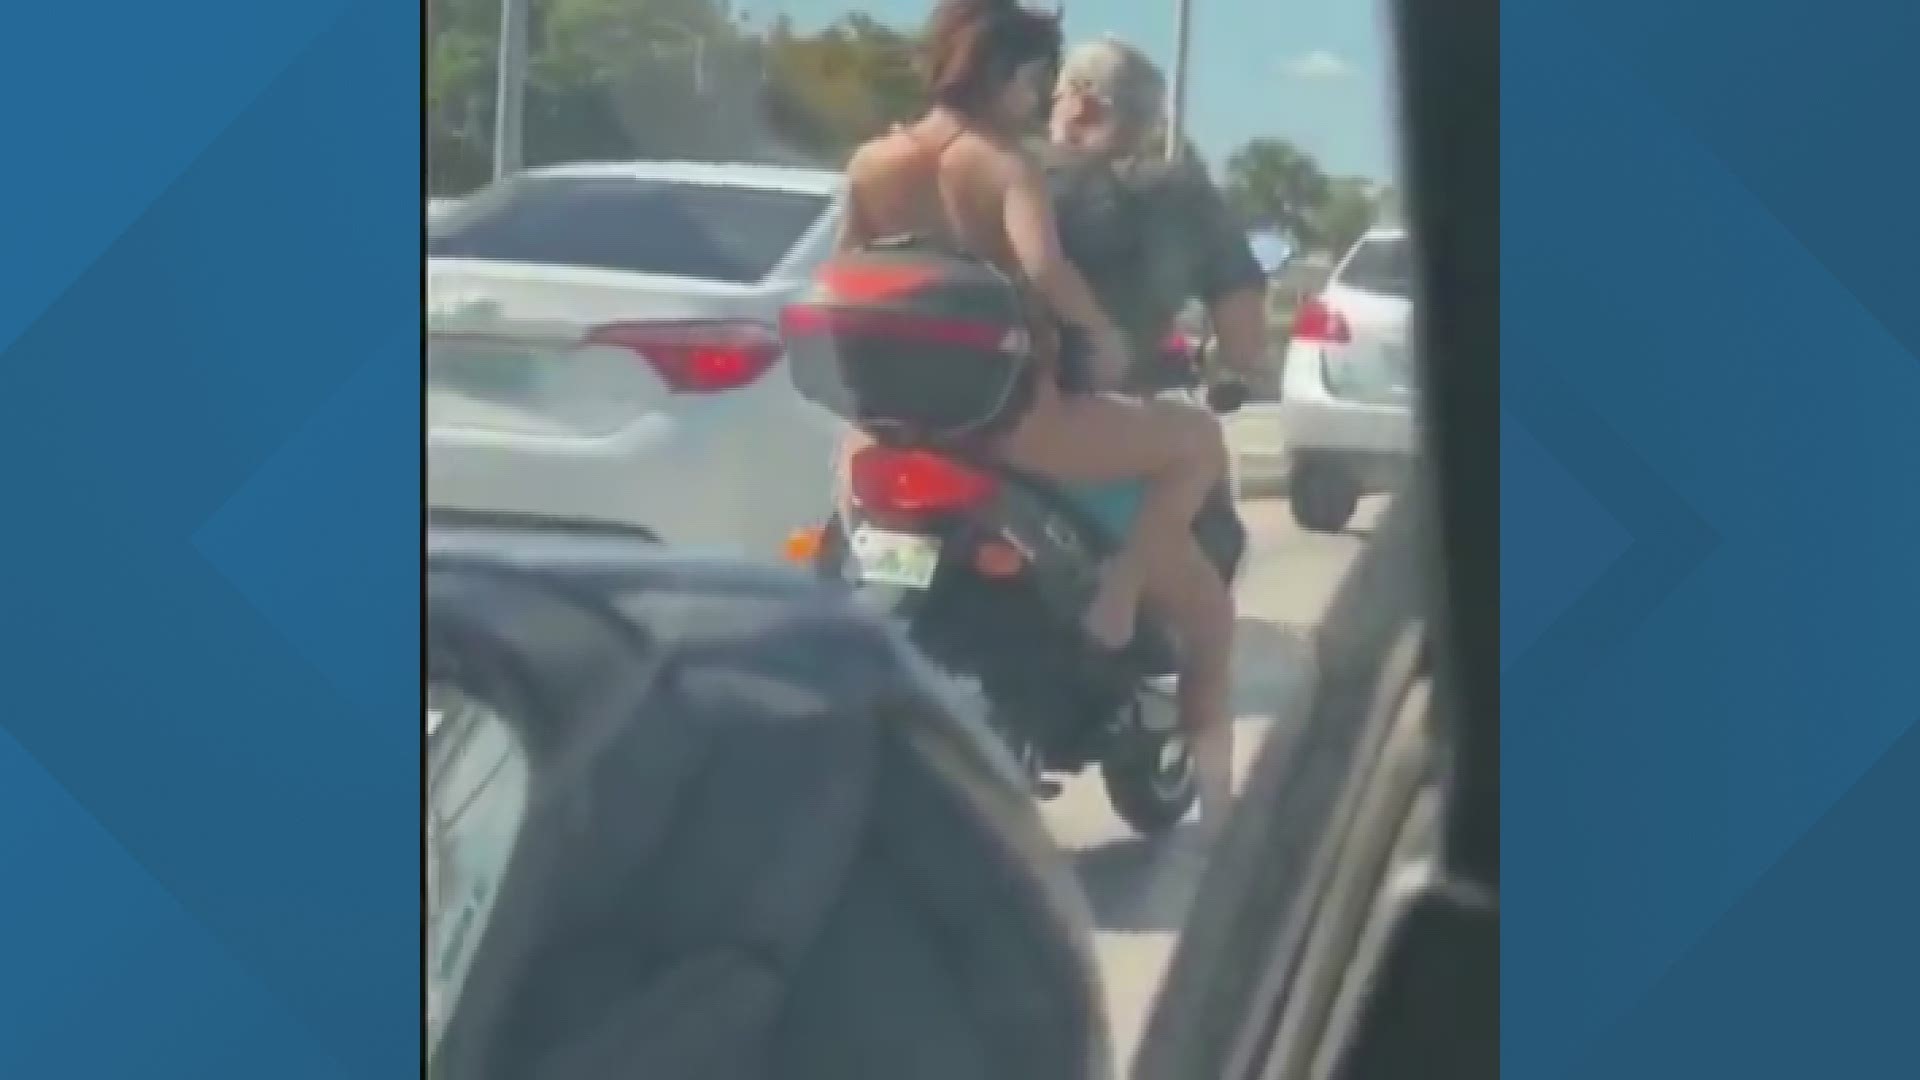 Woman captured on video shaving her legs on the back of a motorcycle.